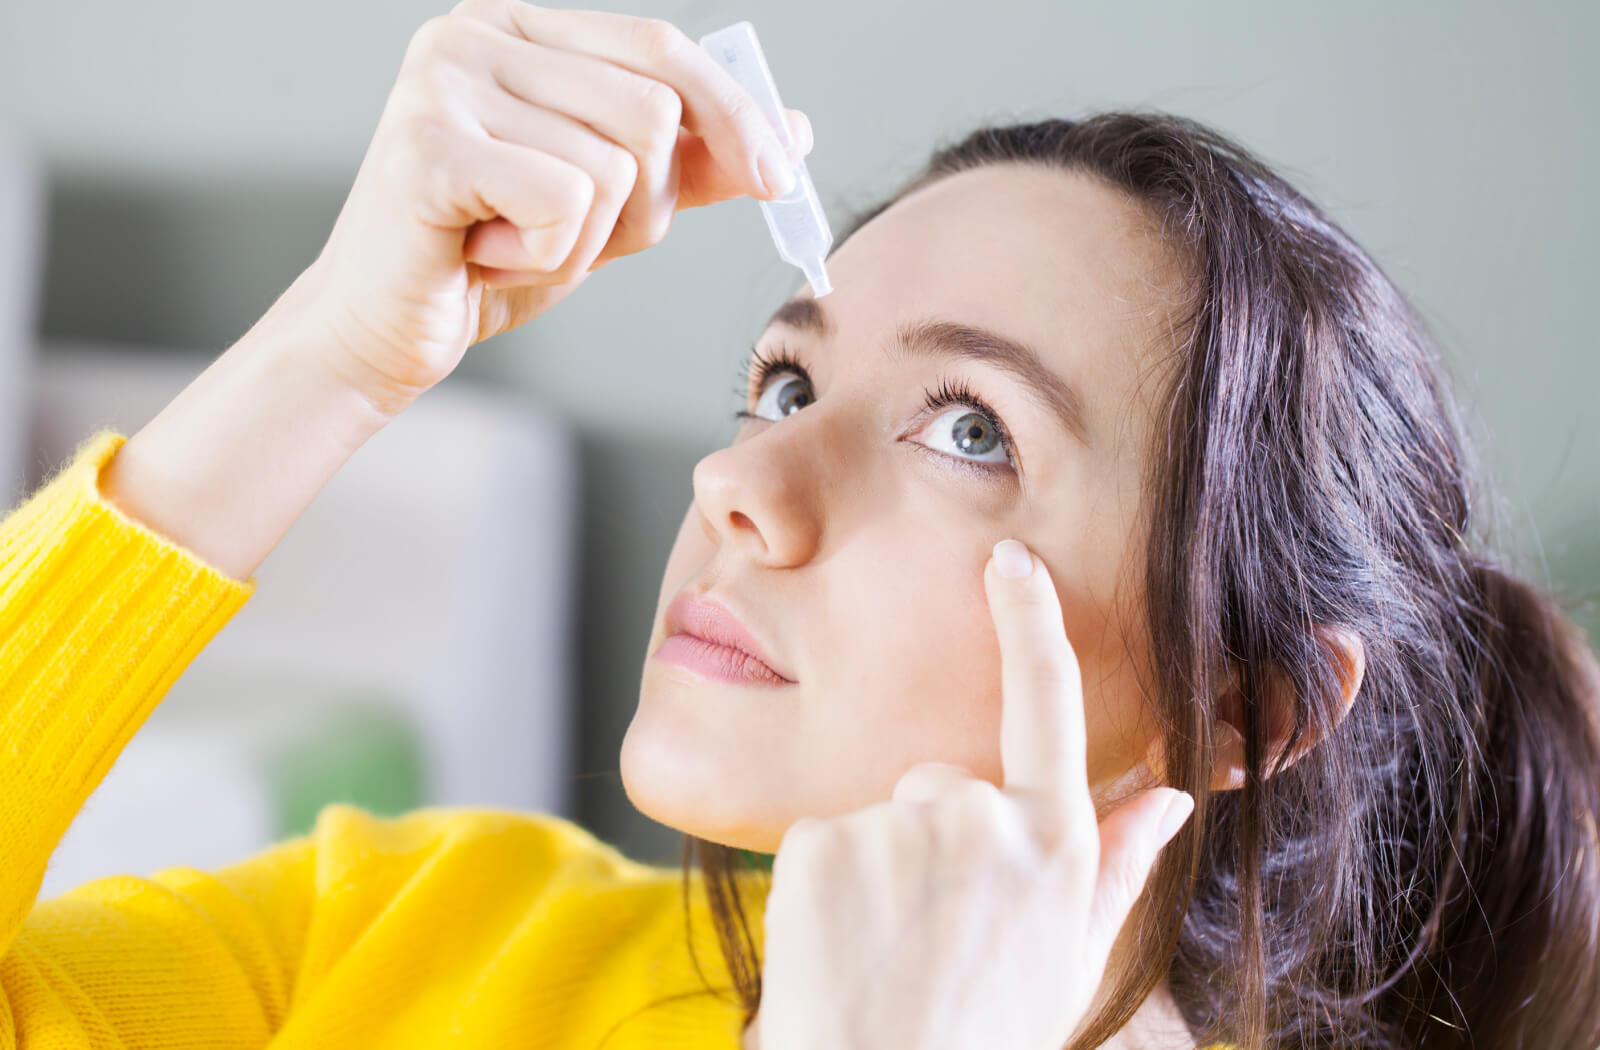 A woman holding a small bottle of eye drops in her right hand and putting them on her left eye.
